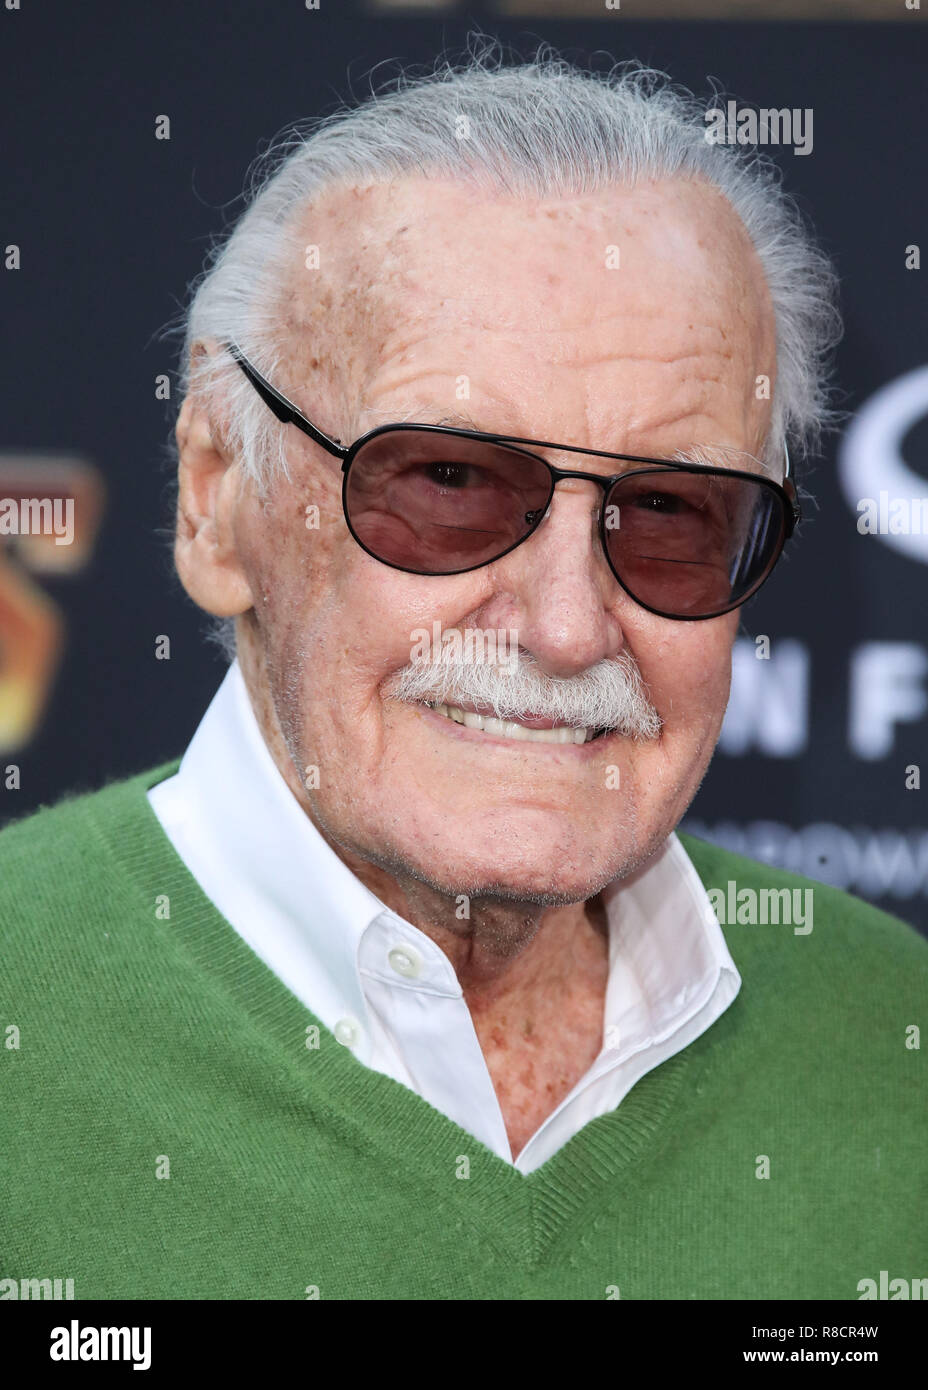 HOLLYWOOD, LOS ANGELES, CA, USA - APRIL 23: Stan Lee at the World Premiere Of Disney And Marvel's 'Avengers: Infinity War' held at the El Capitan Theatre, Dolby Theatre and TCL Chinese Theatre IMAX on April 23, 2018 in Hollywood, Los Angeles, California, United States. (Photo by Xavier Collin/Image Press Agency) Stock Photo